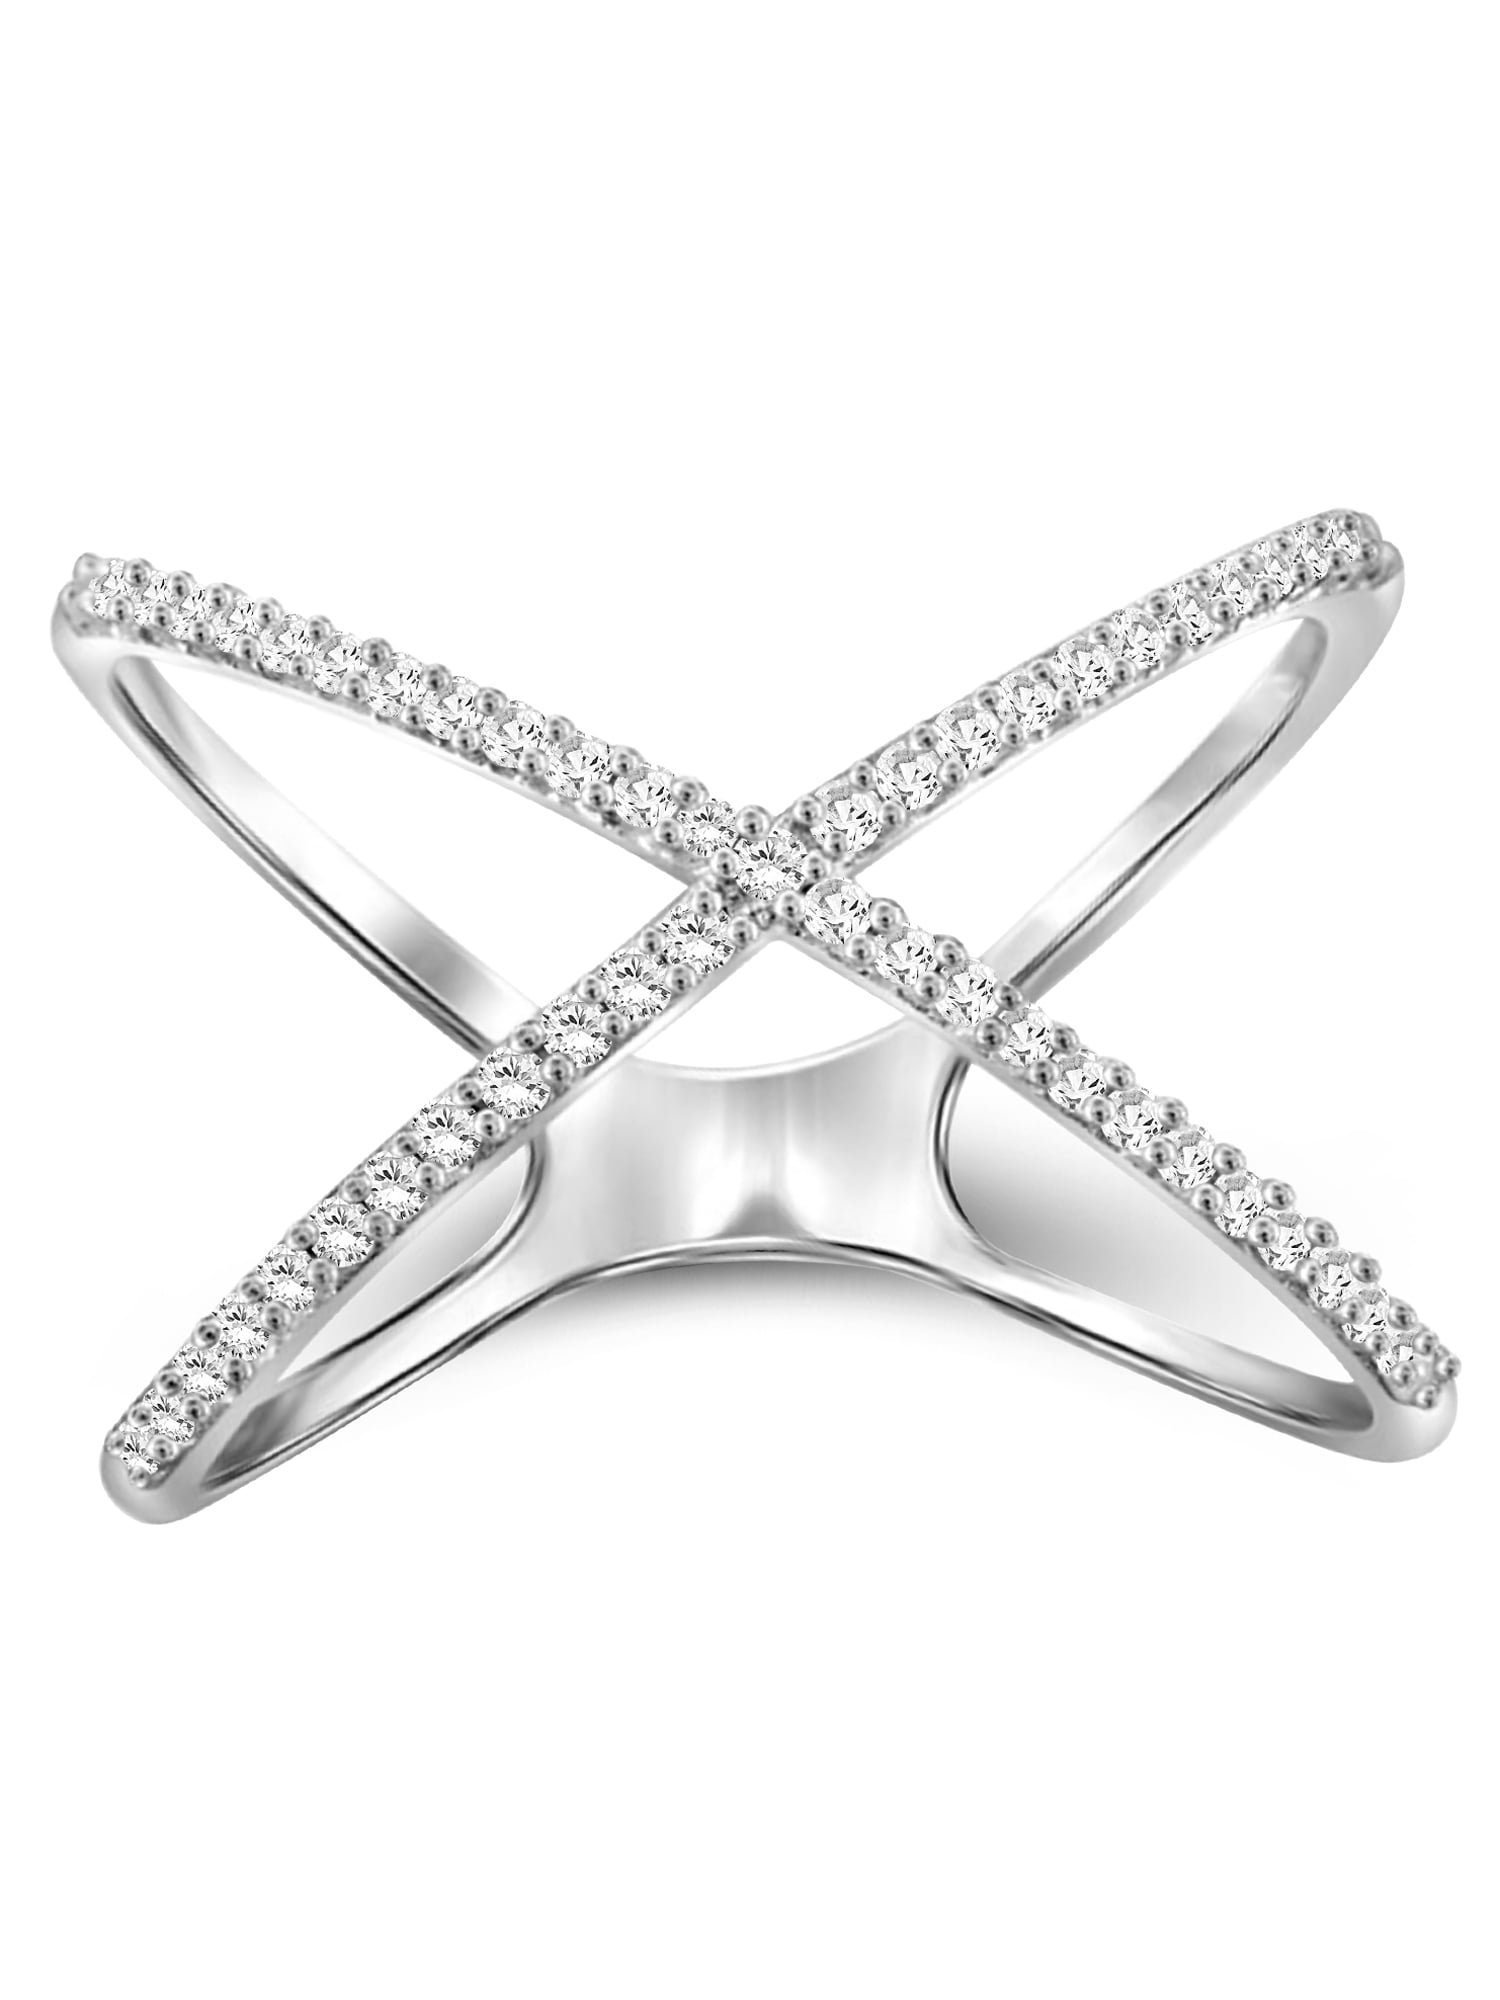 JewelersClub Sterling Silver Criss Cross Ring – 1/7 Carat White Diamond Ring  with .925 Sterling Silver X Ring – Real Diamond Criscross Ring with  Hypoallergenic Sterling Silver Ring Band - Walmart.com